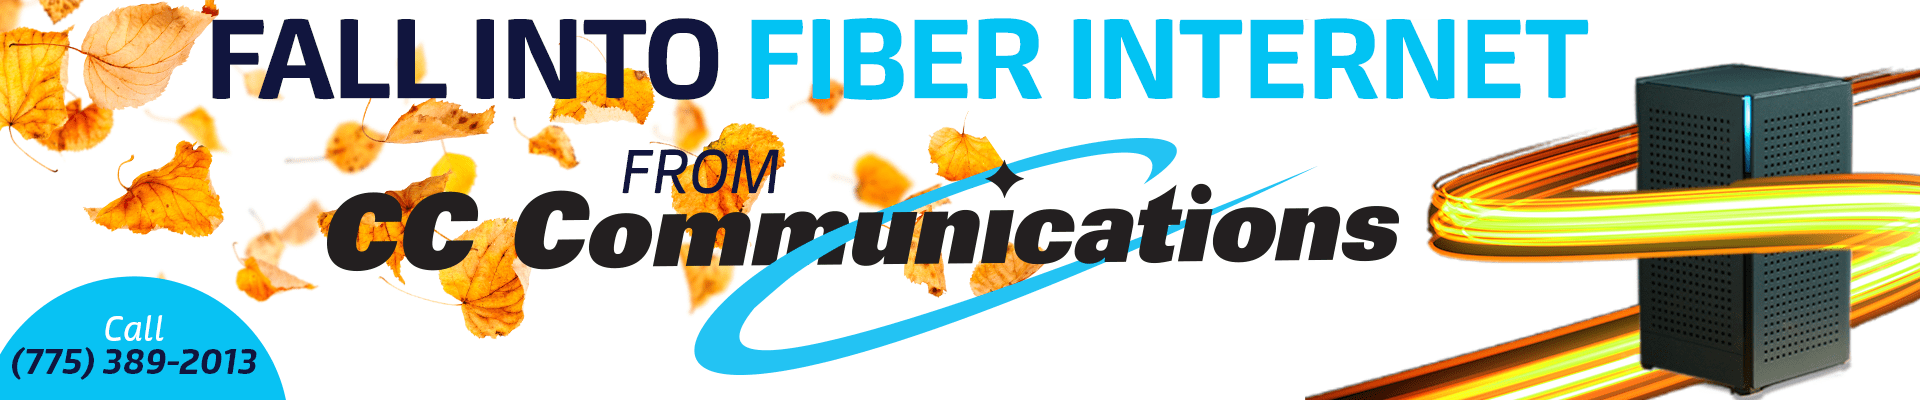 Fall into Fiber Internet from CC Communications.